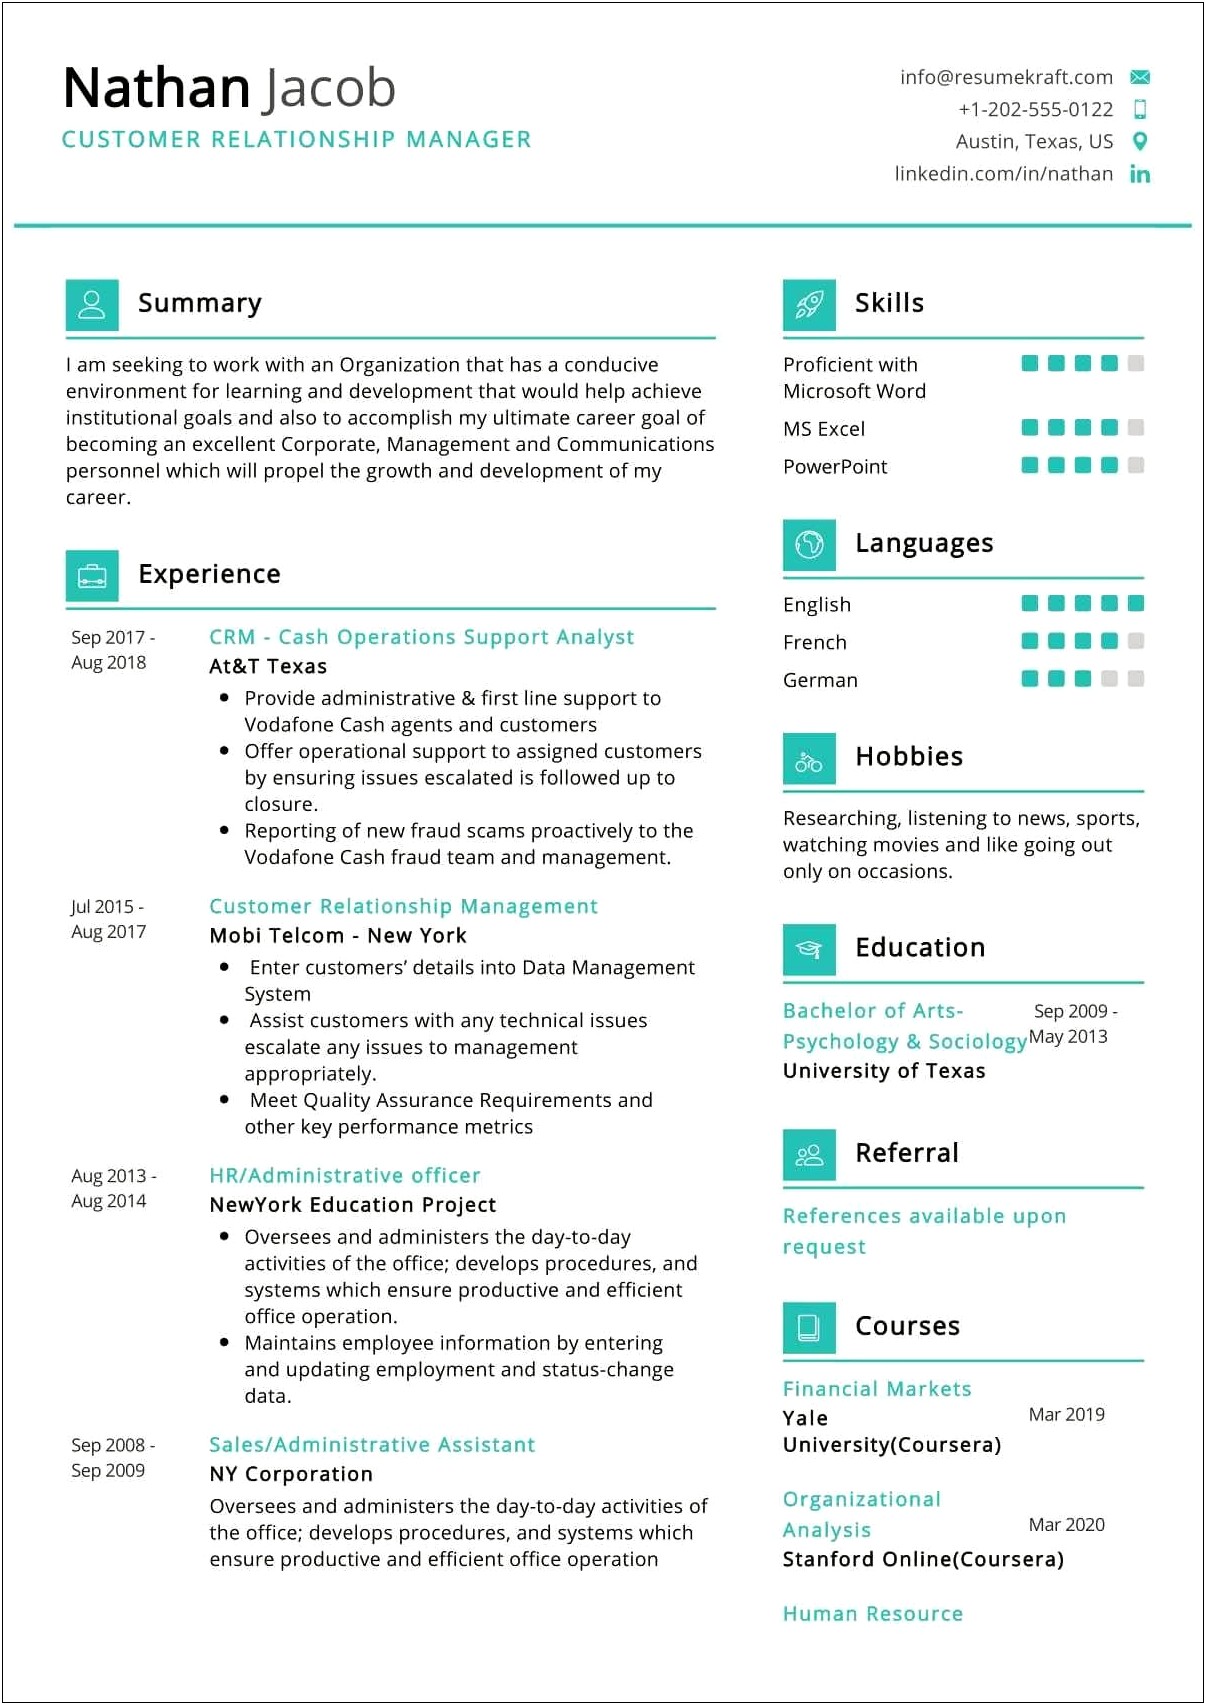 Professional Resume For Customer Relationship Manager